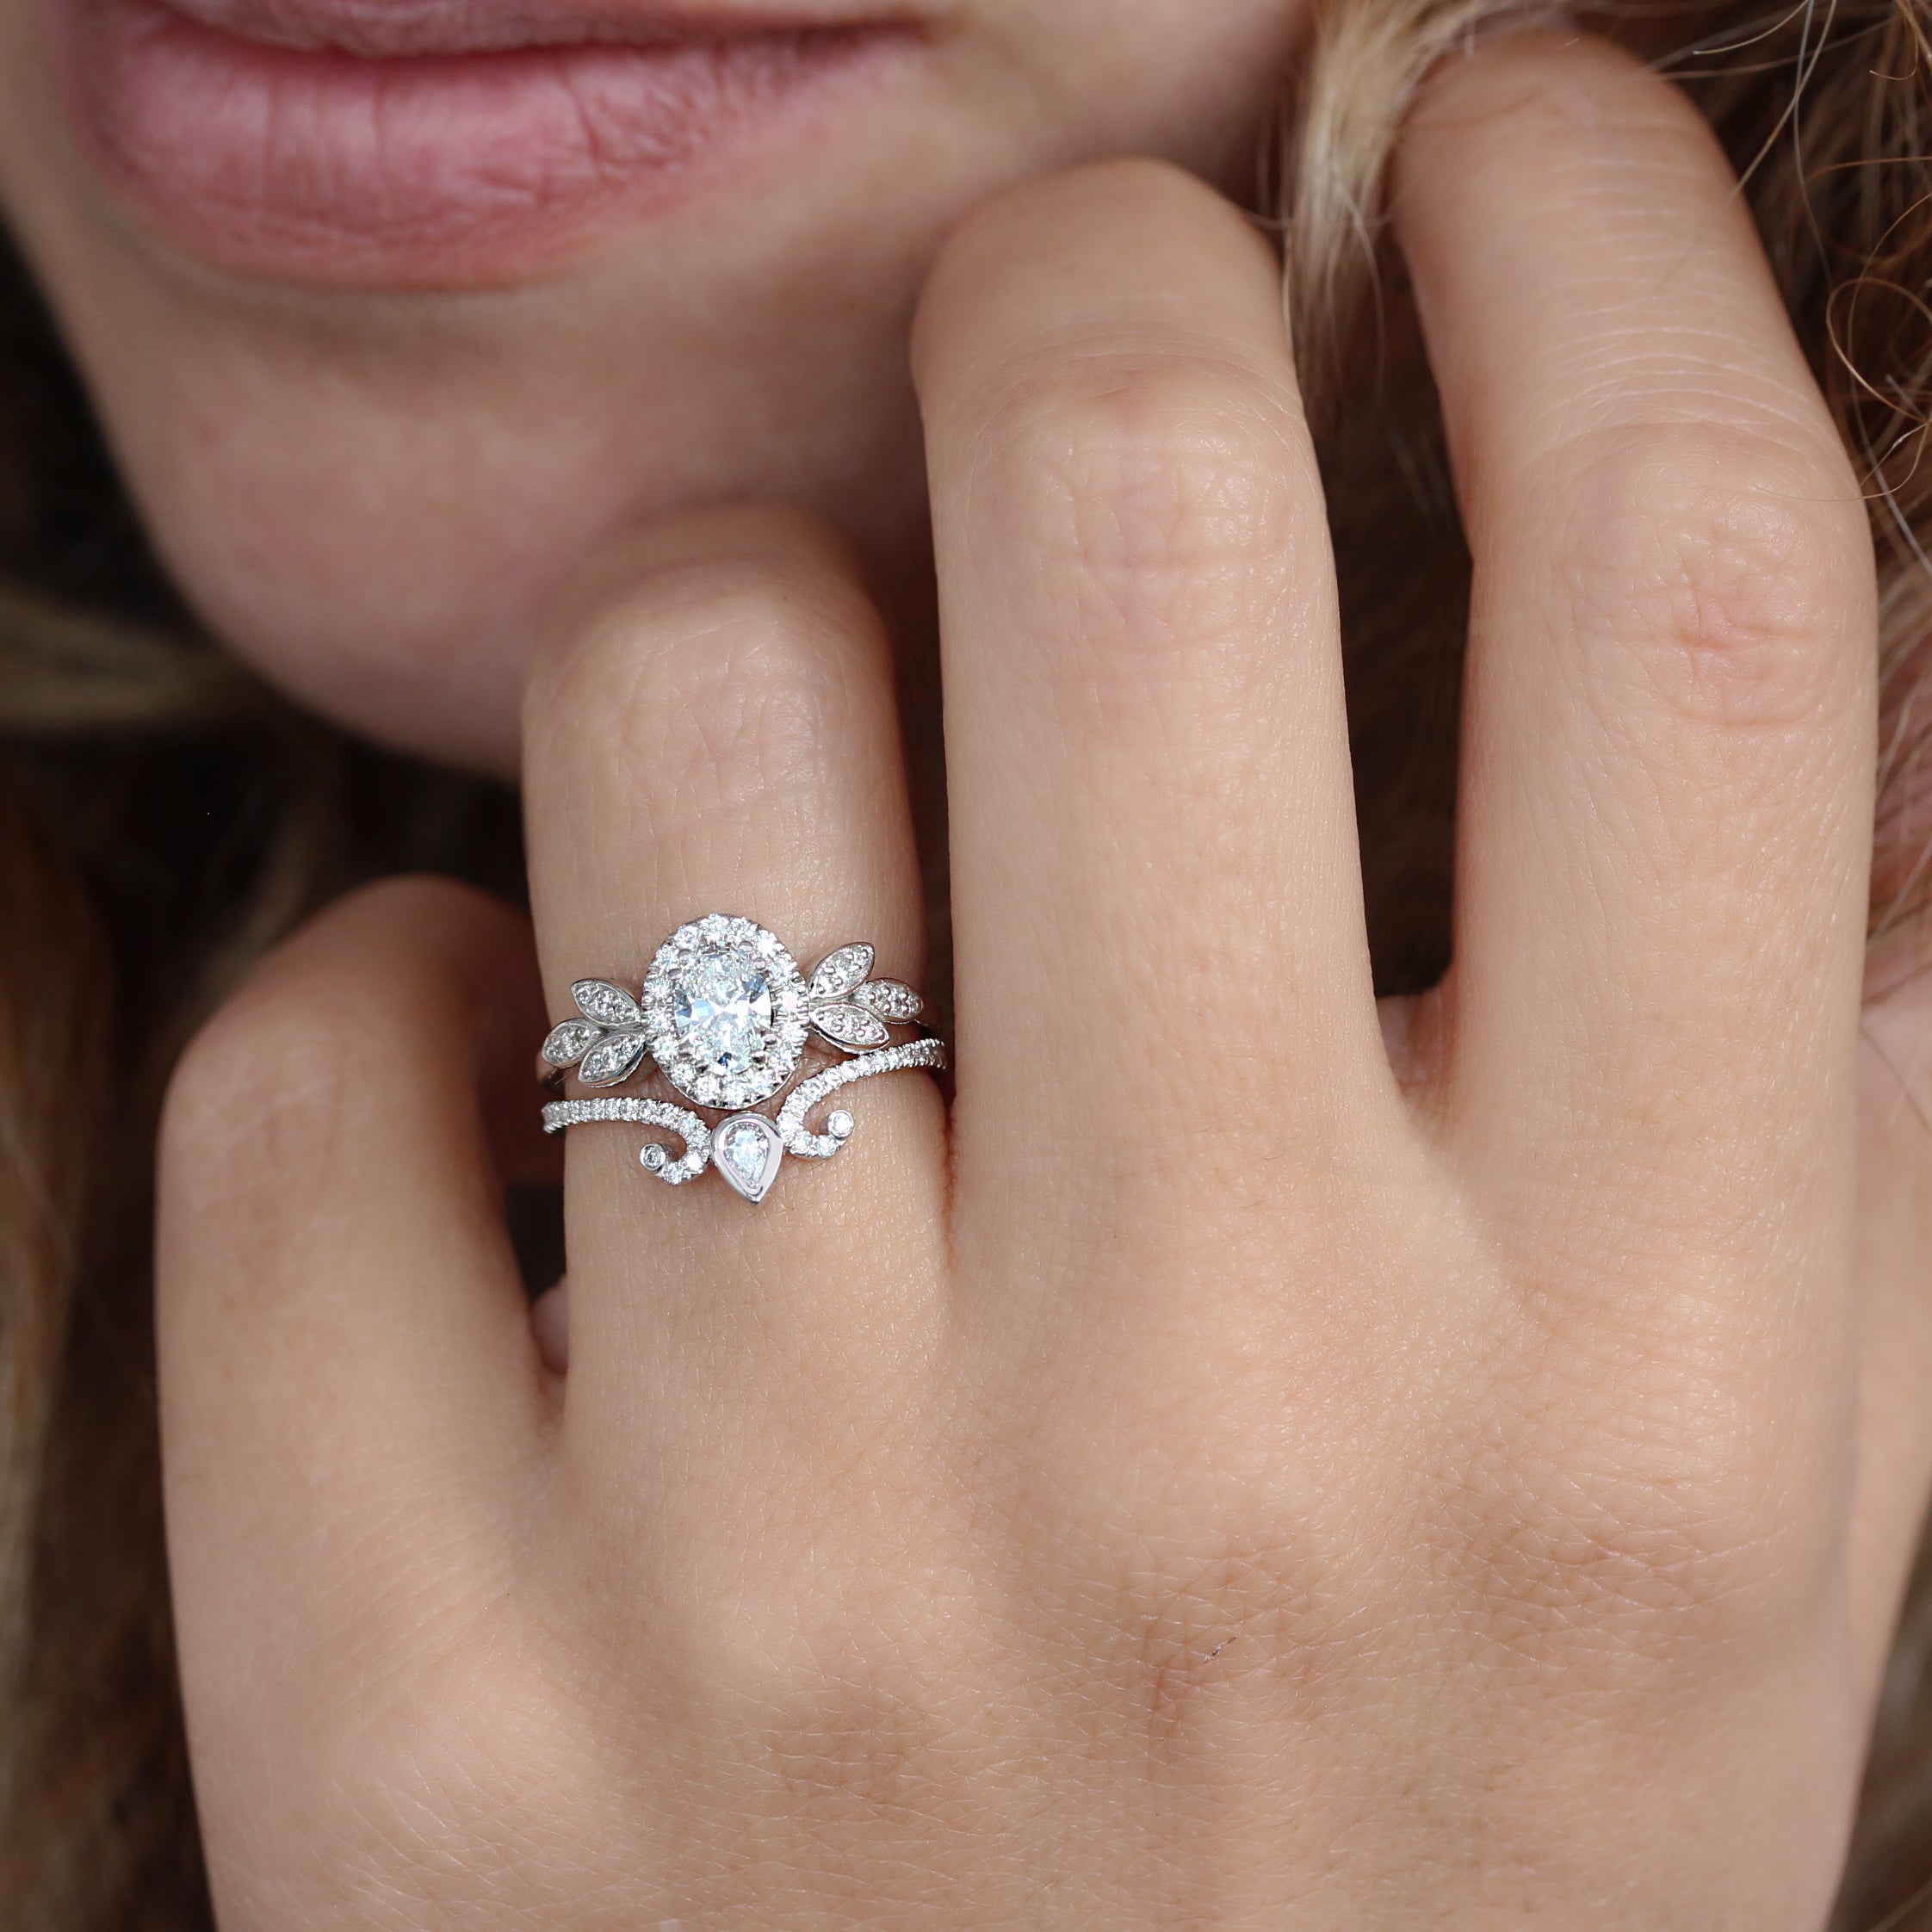 Oval Diamond Engagement Two Rings Set - Minimal Lily & Ariana ♥